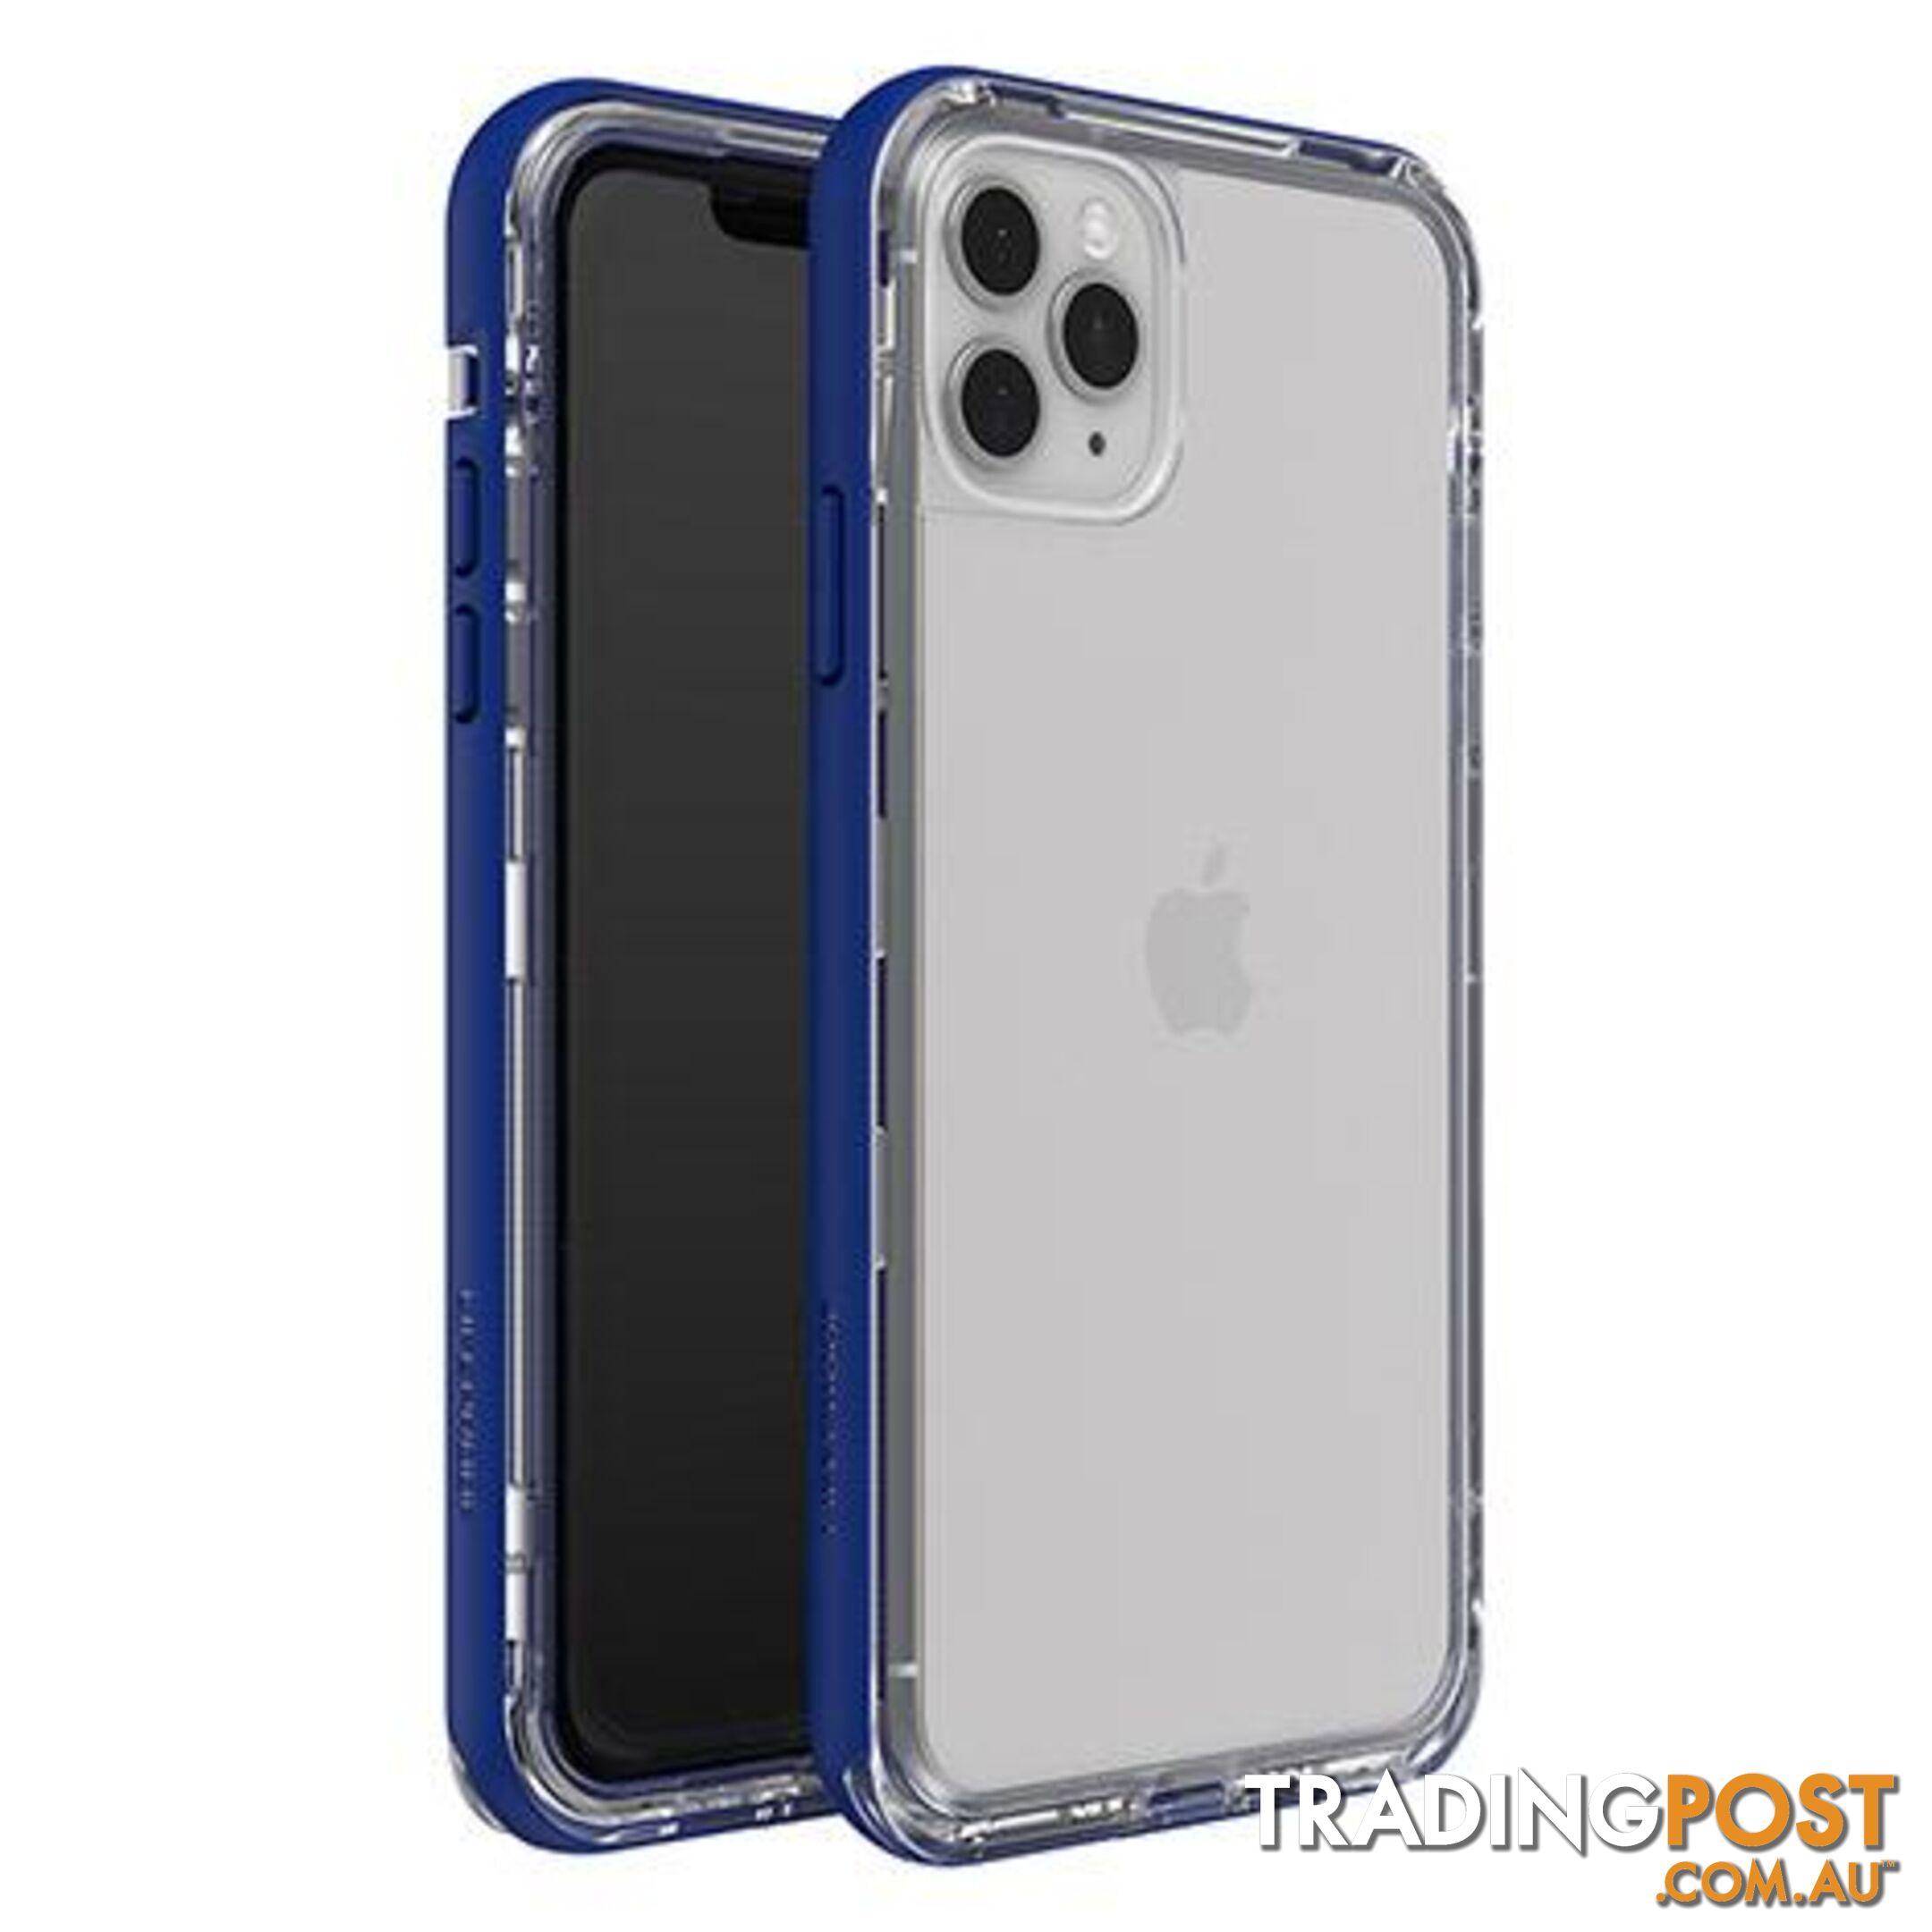 LifeProof Next Case For iPhone 11 Pro Max - LifeProof - Blueberry Frost - 660543512875